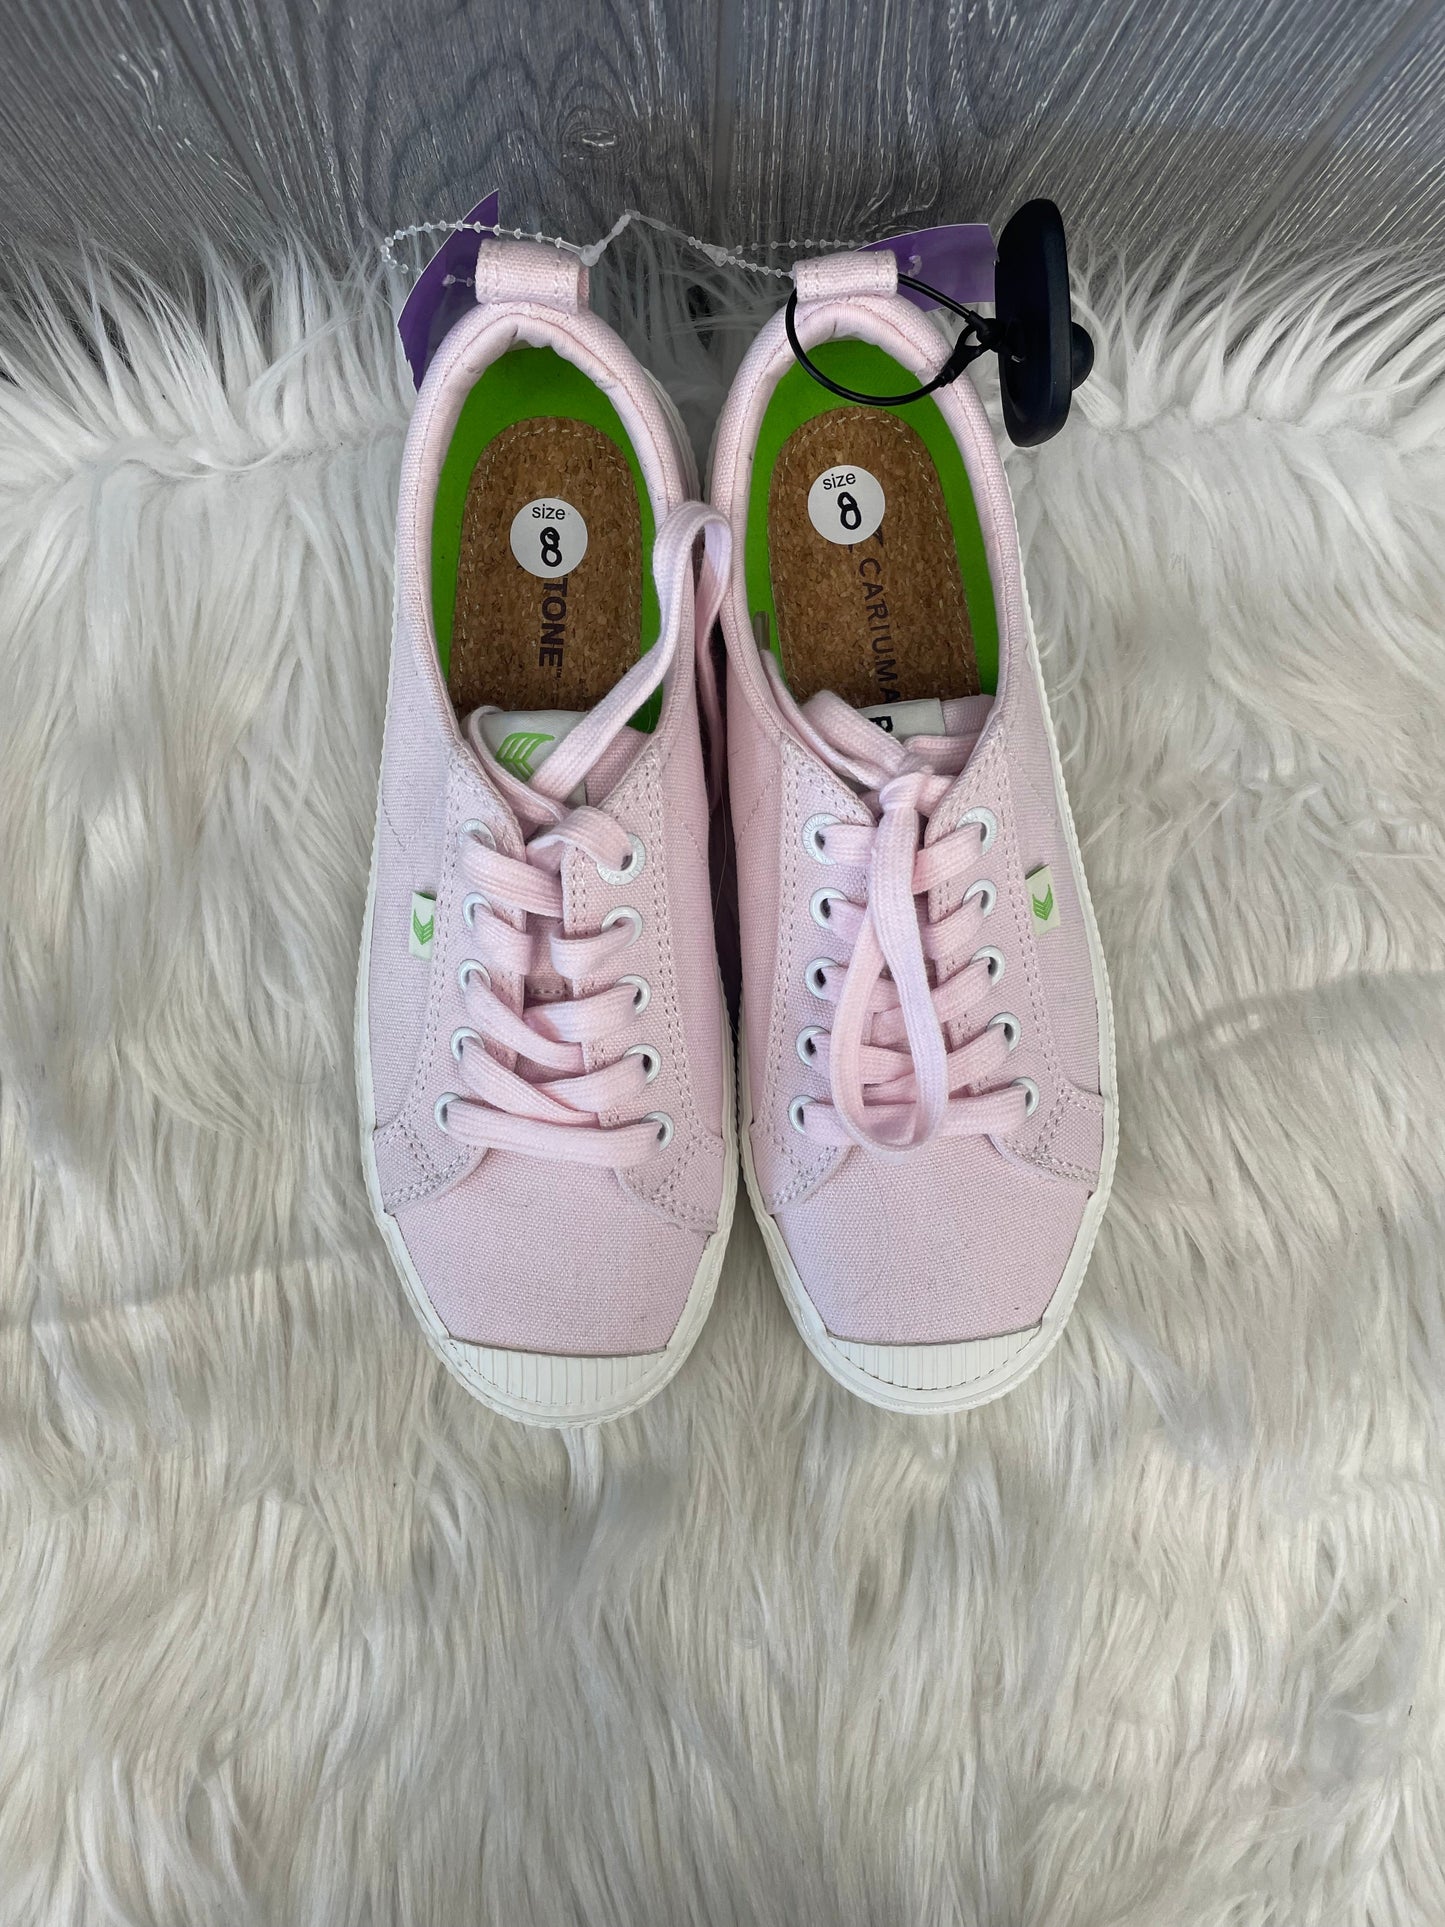 Pink Shoes Sneakers Cariuma, Size 8